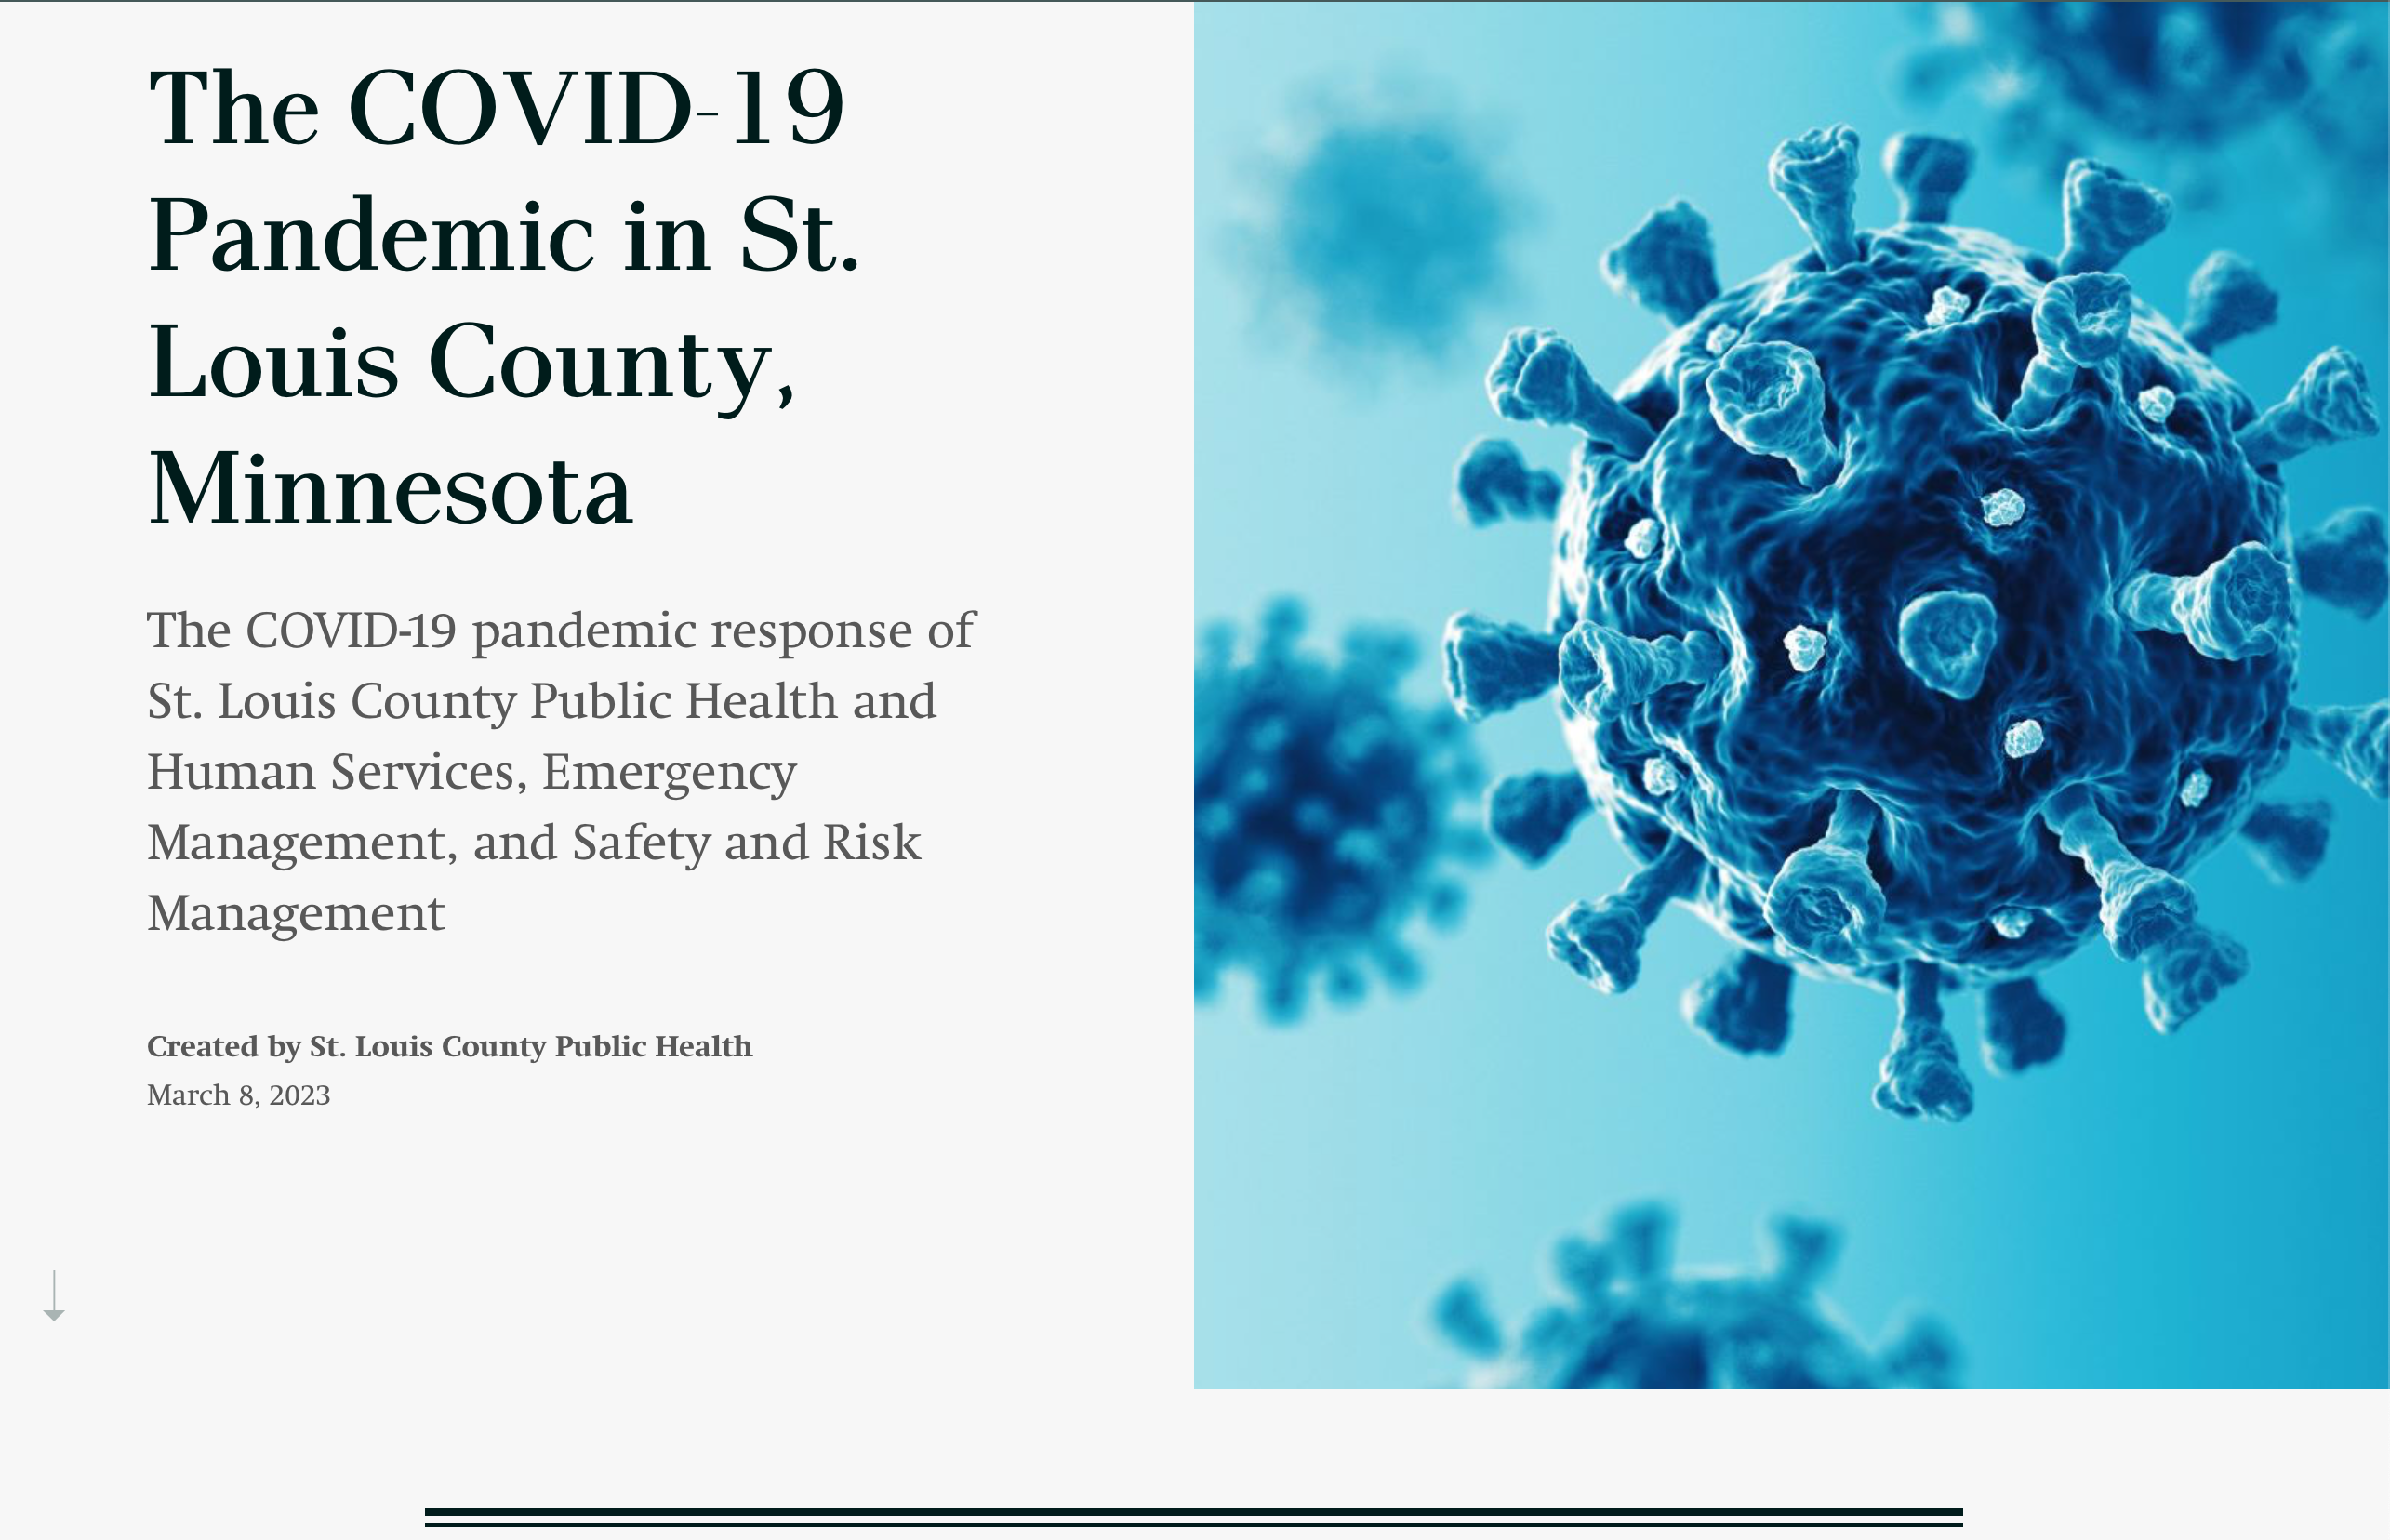 An image of an article written about COVID-19 Pandemic in St. Louis County, Minnesota